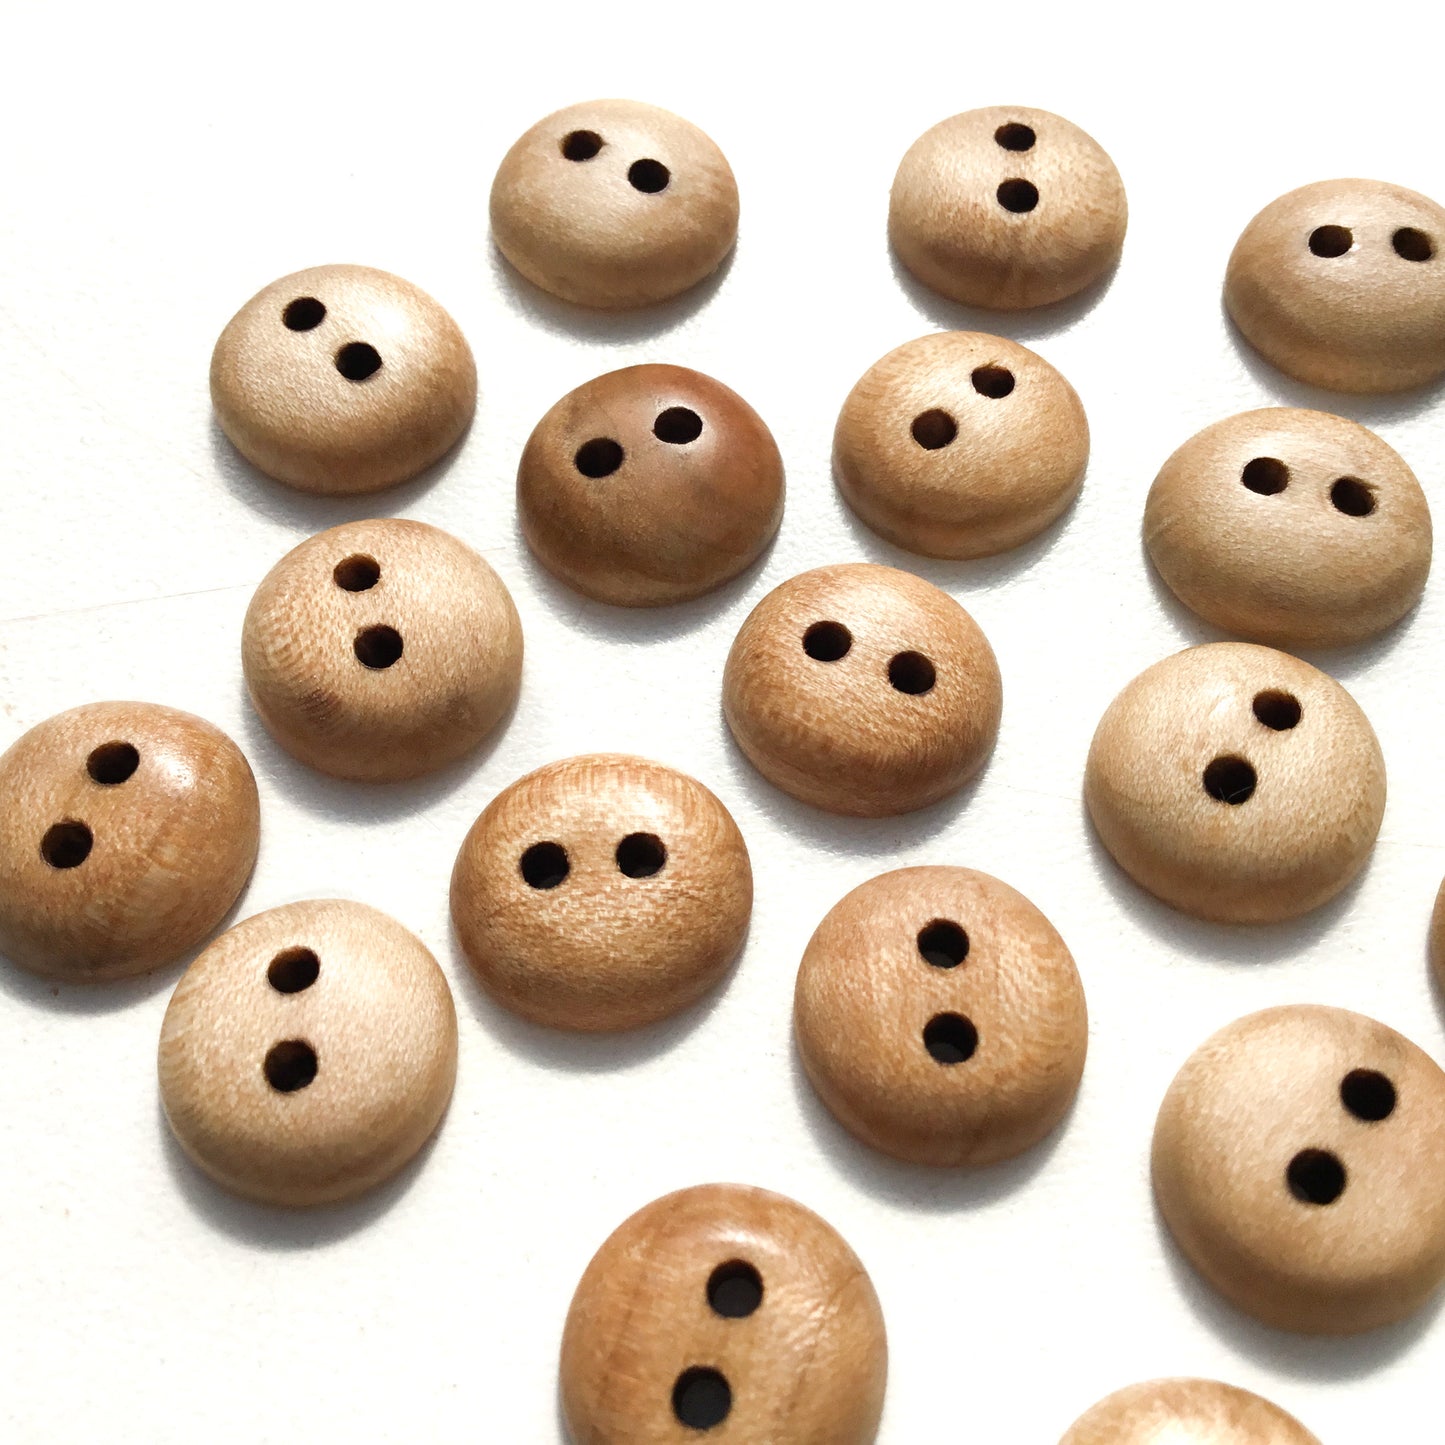 Maple Wood Buttons - 1/2"